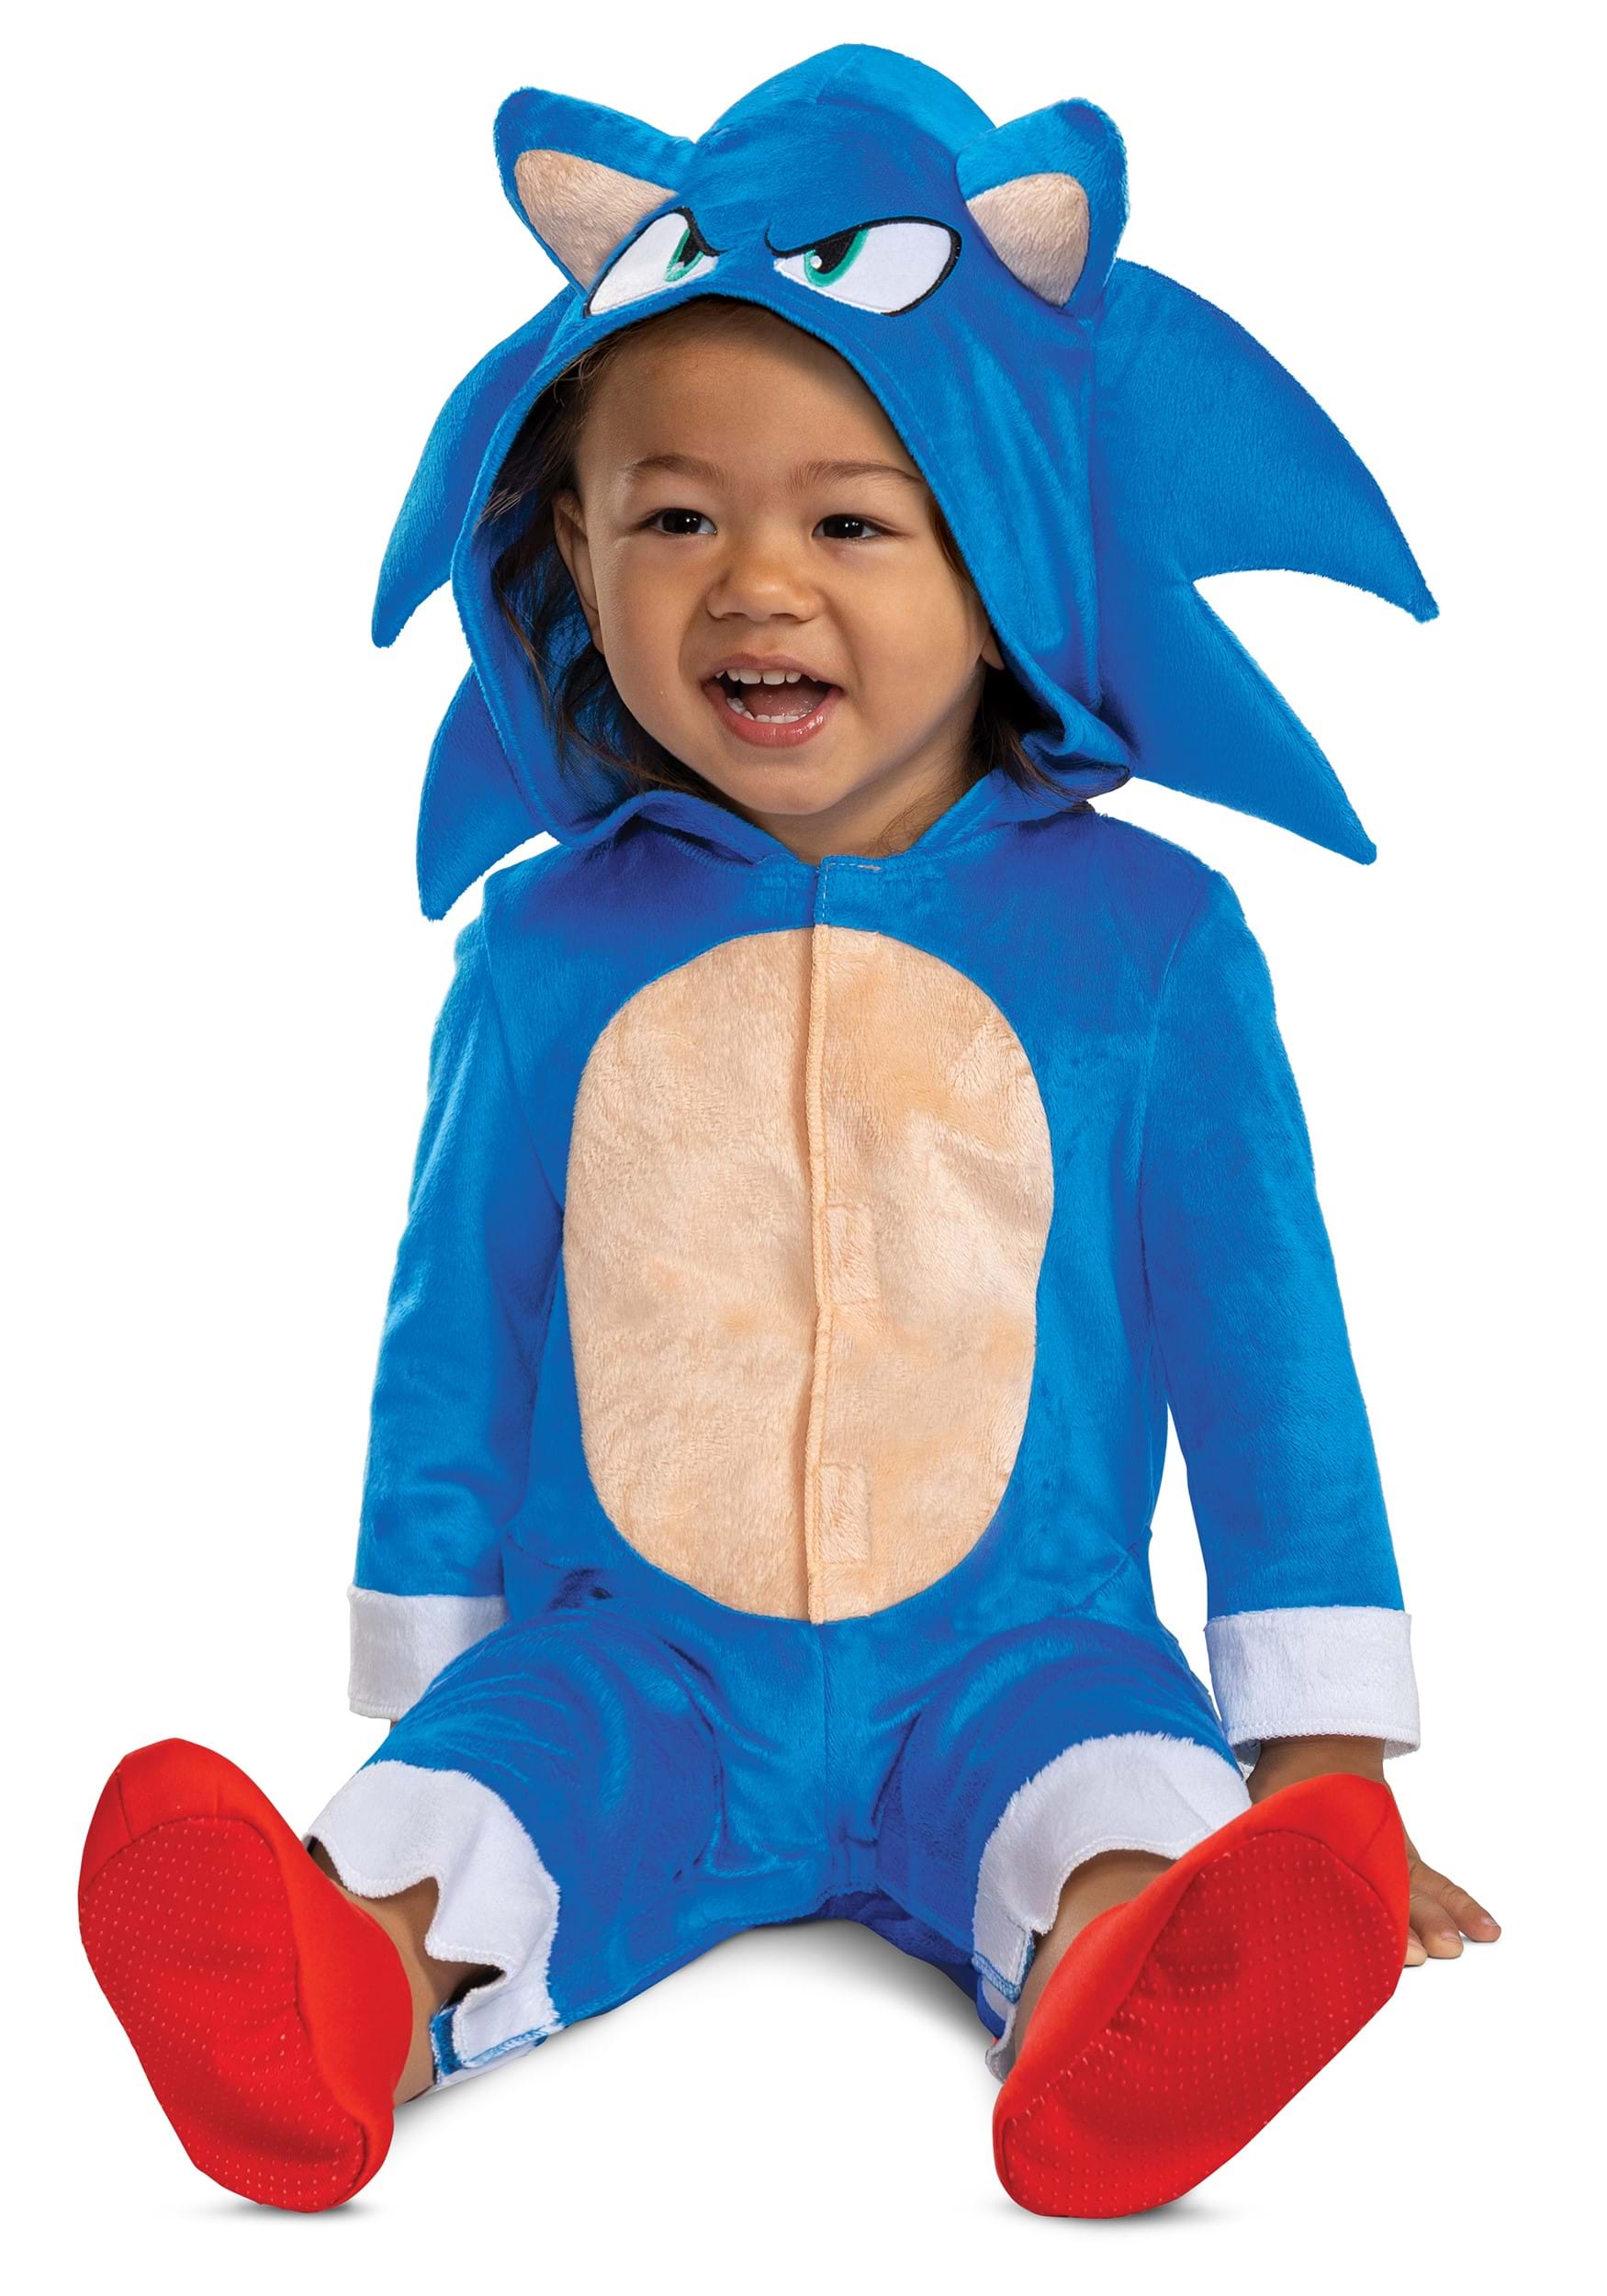 Sonic the Hedgehog Costume for Kids